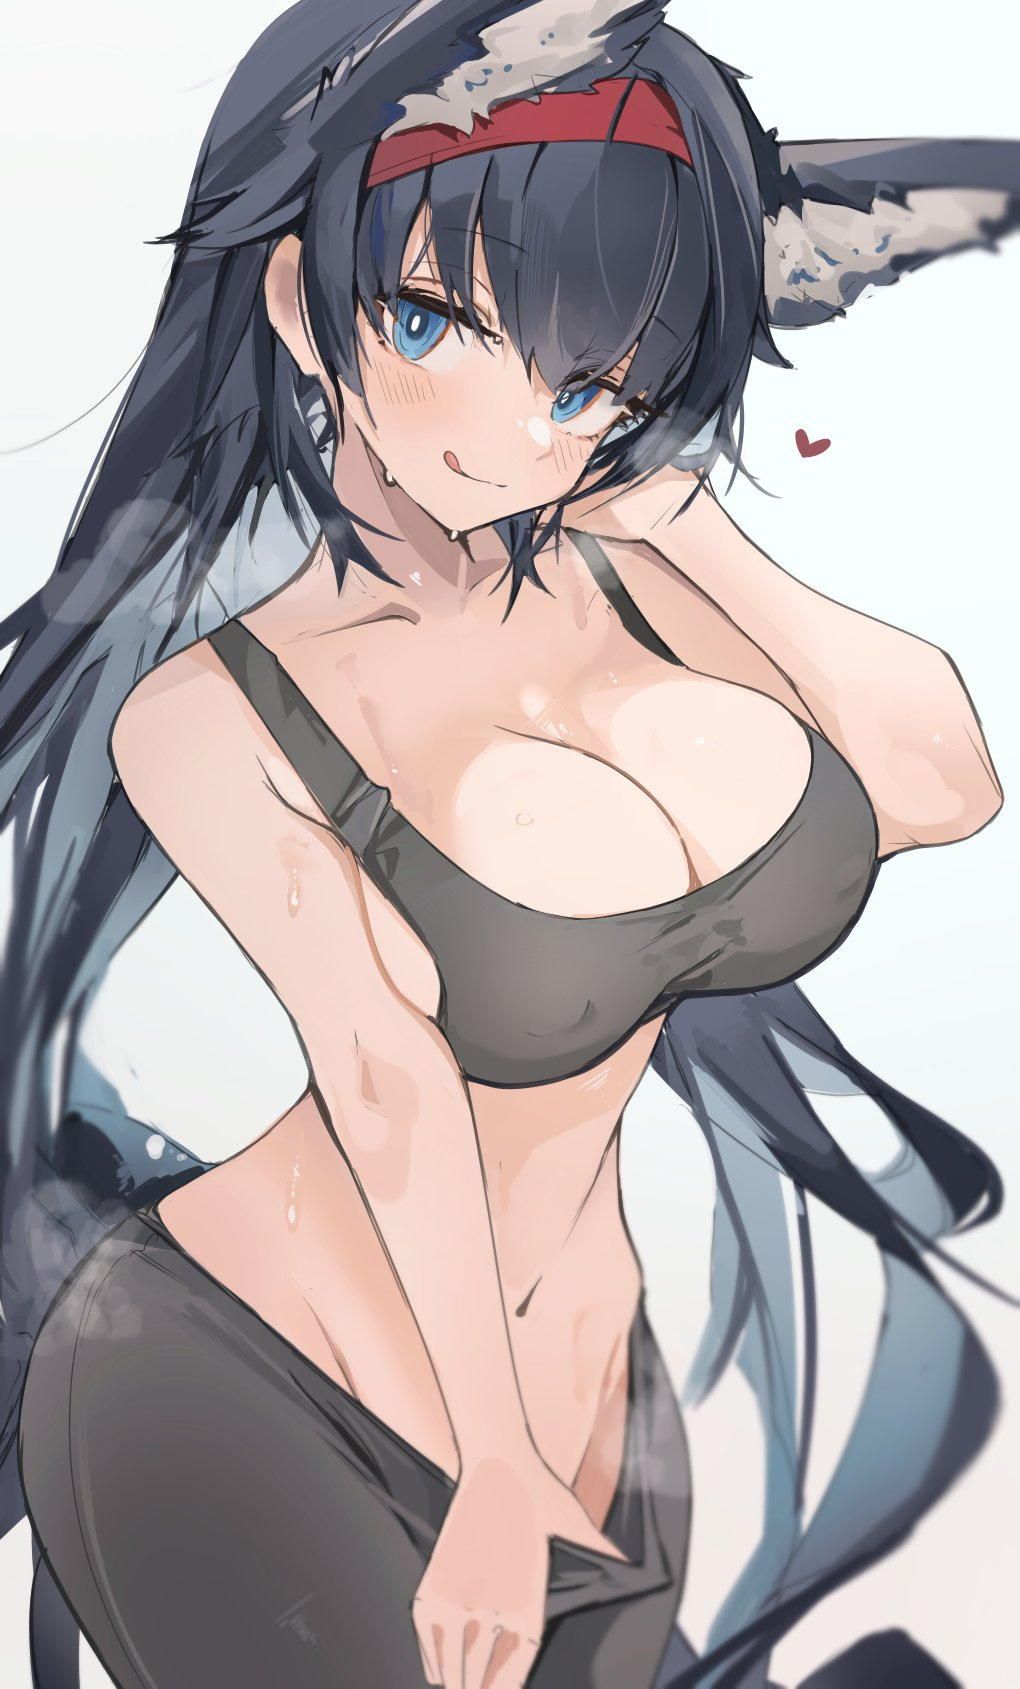 It's an erotic image of Arknights! 5